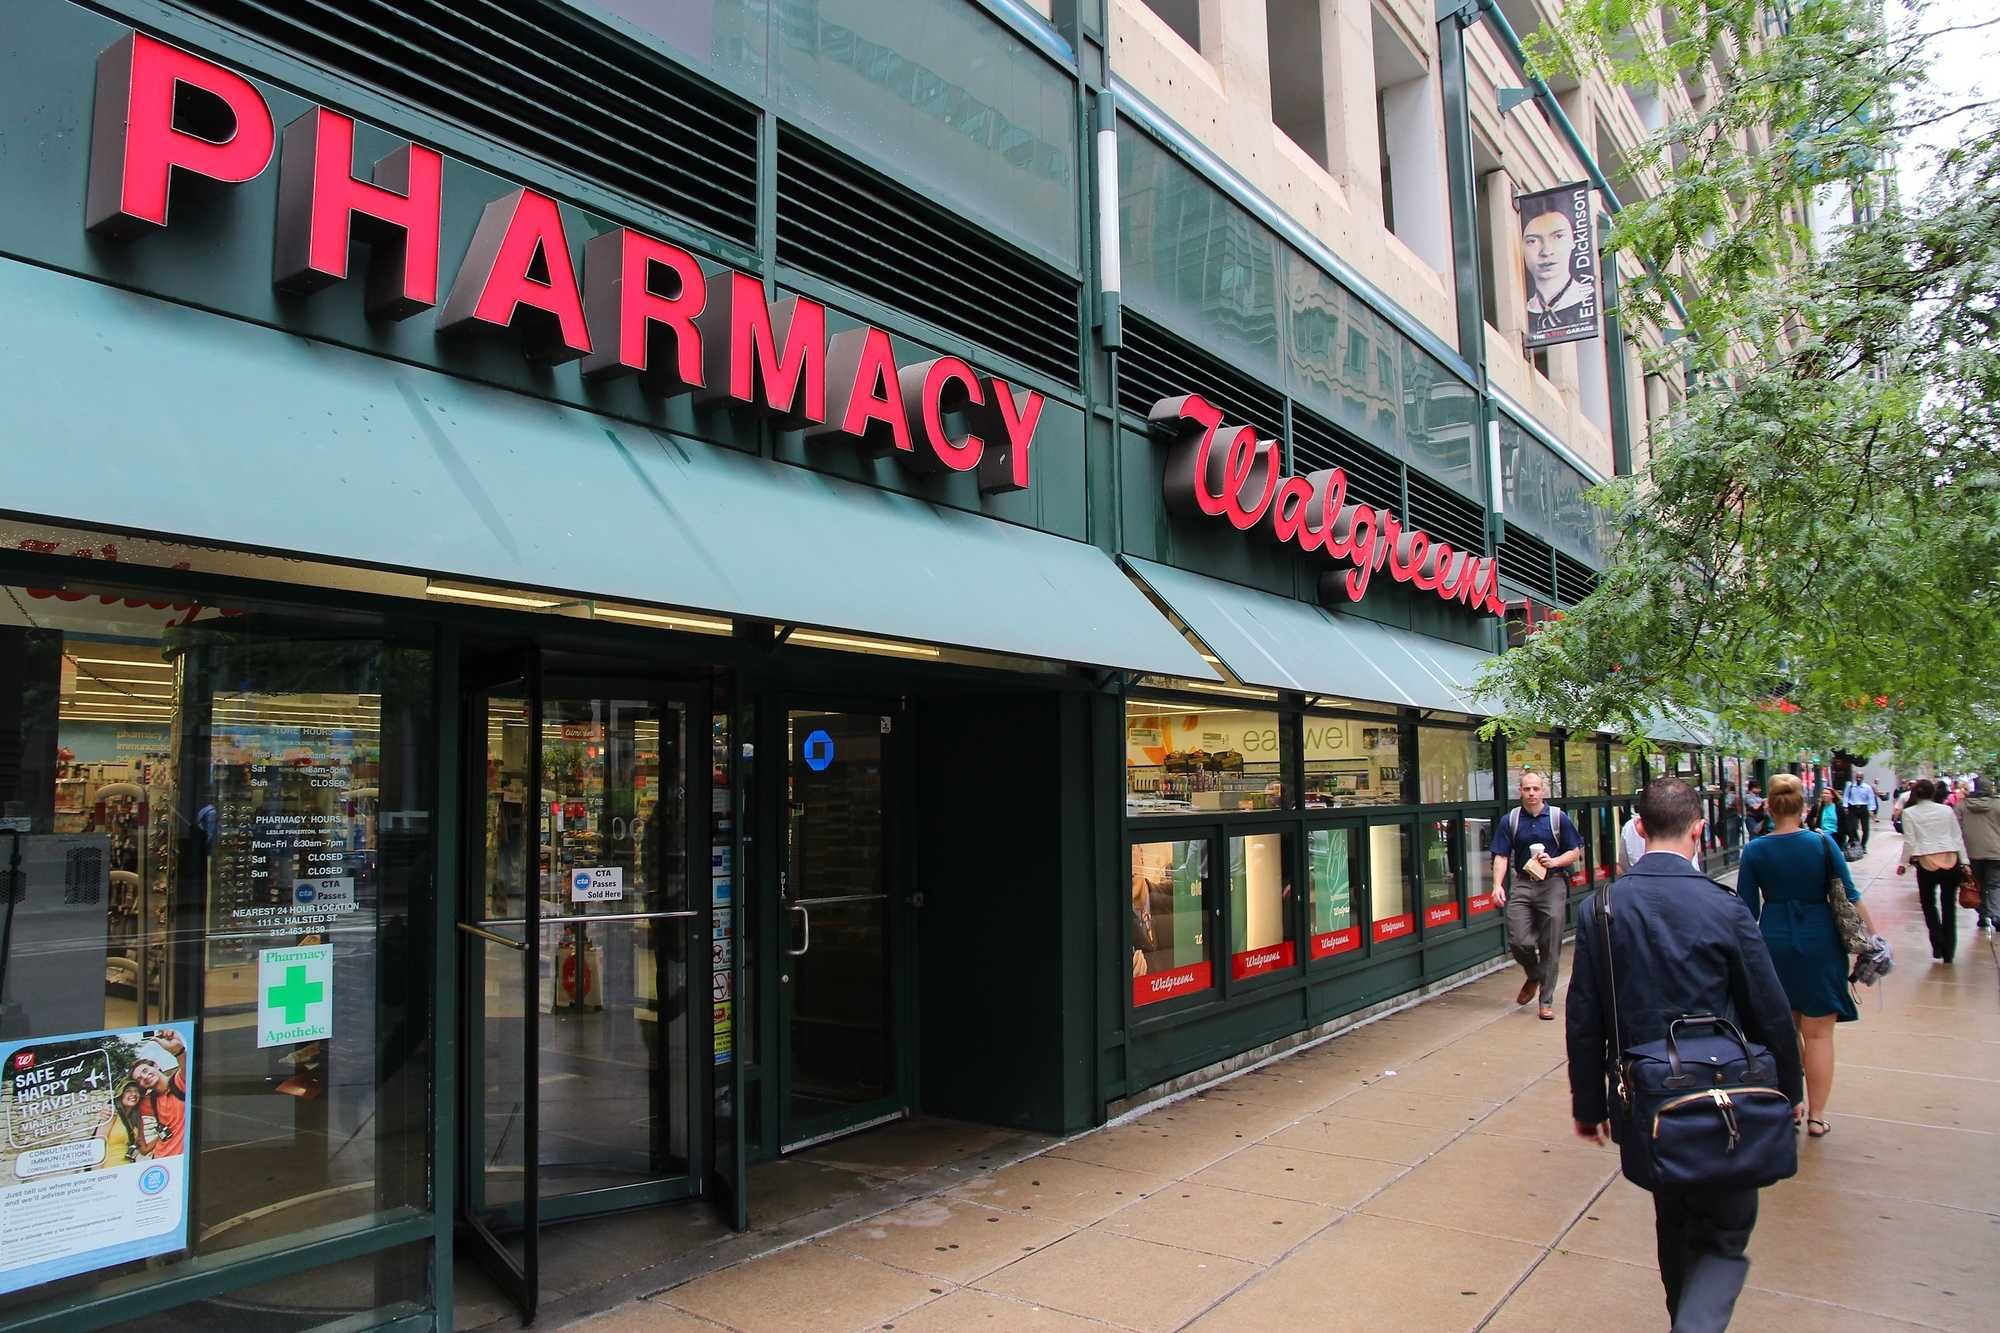 Walgreens prices are allegedly too high.